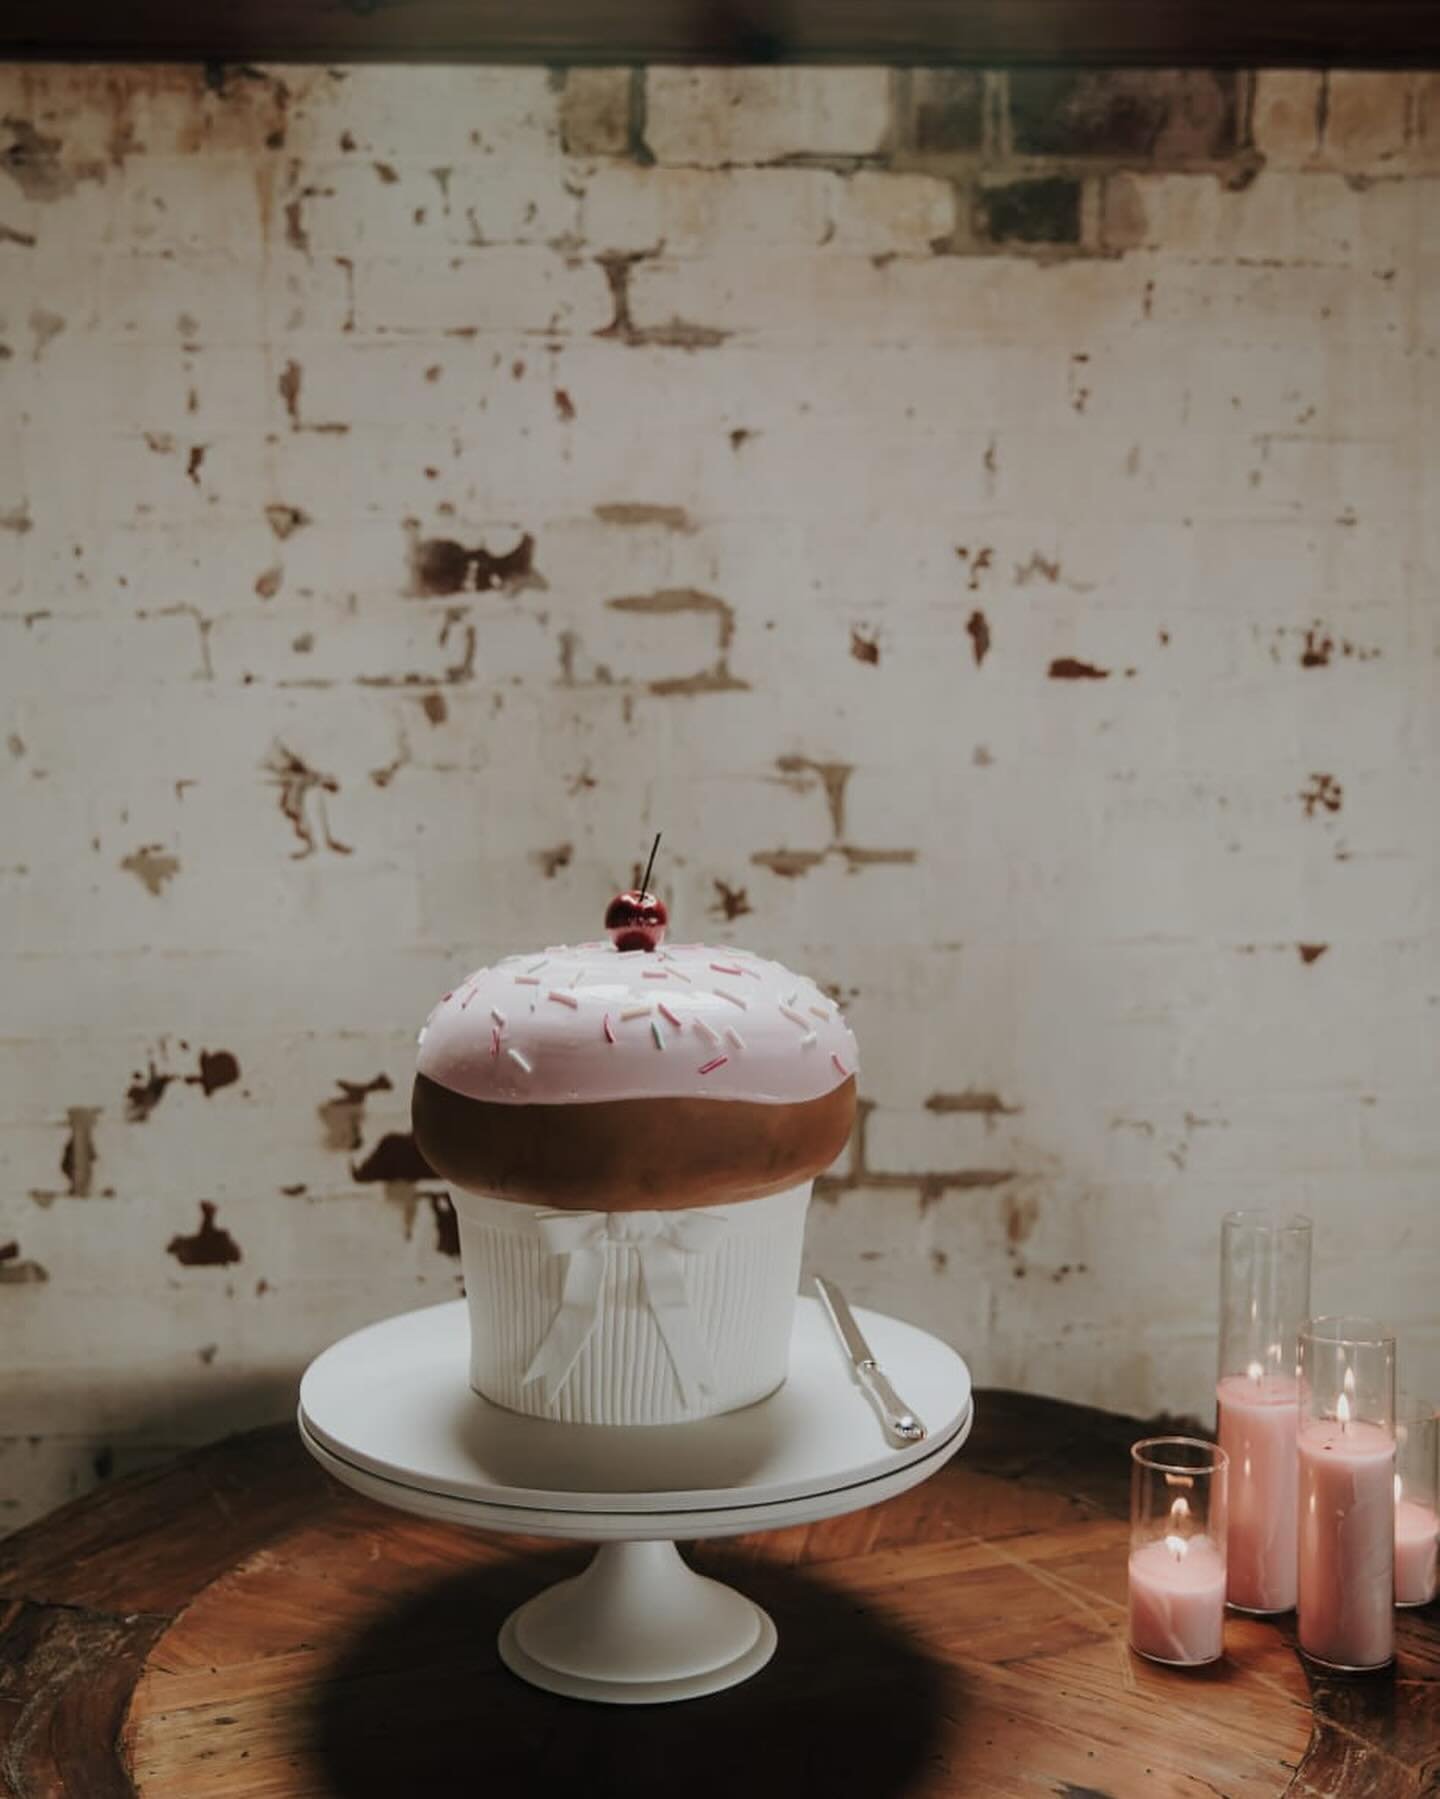 &ldquo;HelloFaye! Thank you for our wedding cake. Daina and I love it! It far exceeded our expectation of large cupcake, so much quirkier!&rdquo;

Lovely words like this make my day! And wow, what lovely shots by @angela_givney_photography 

From a s